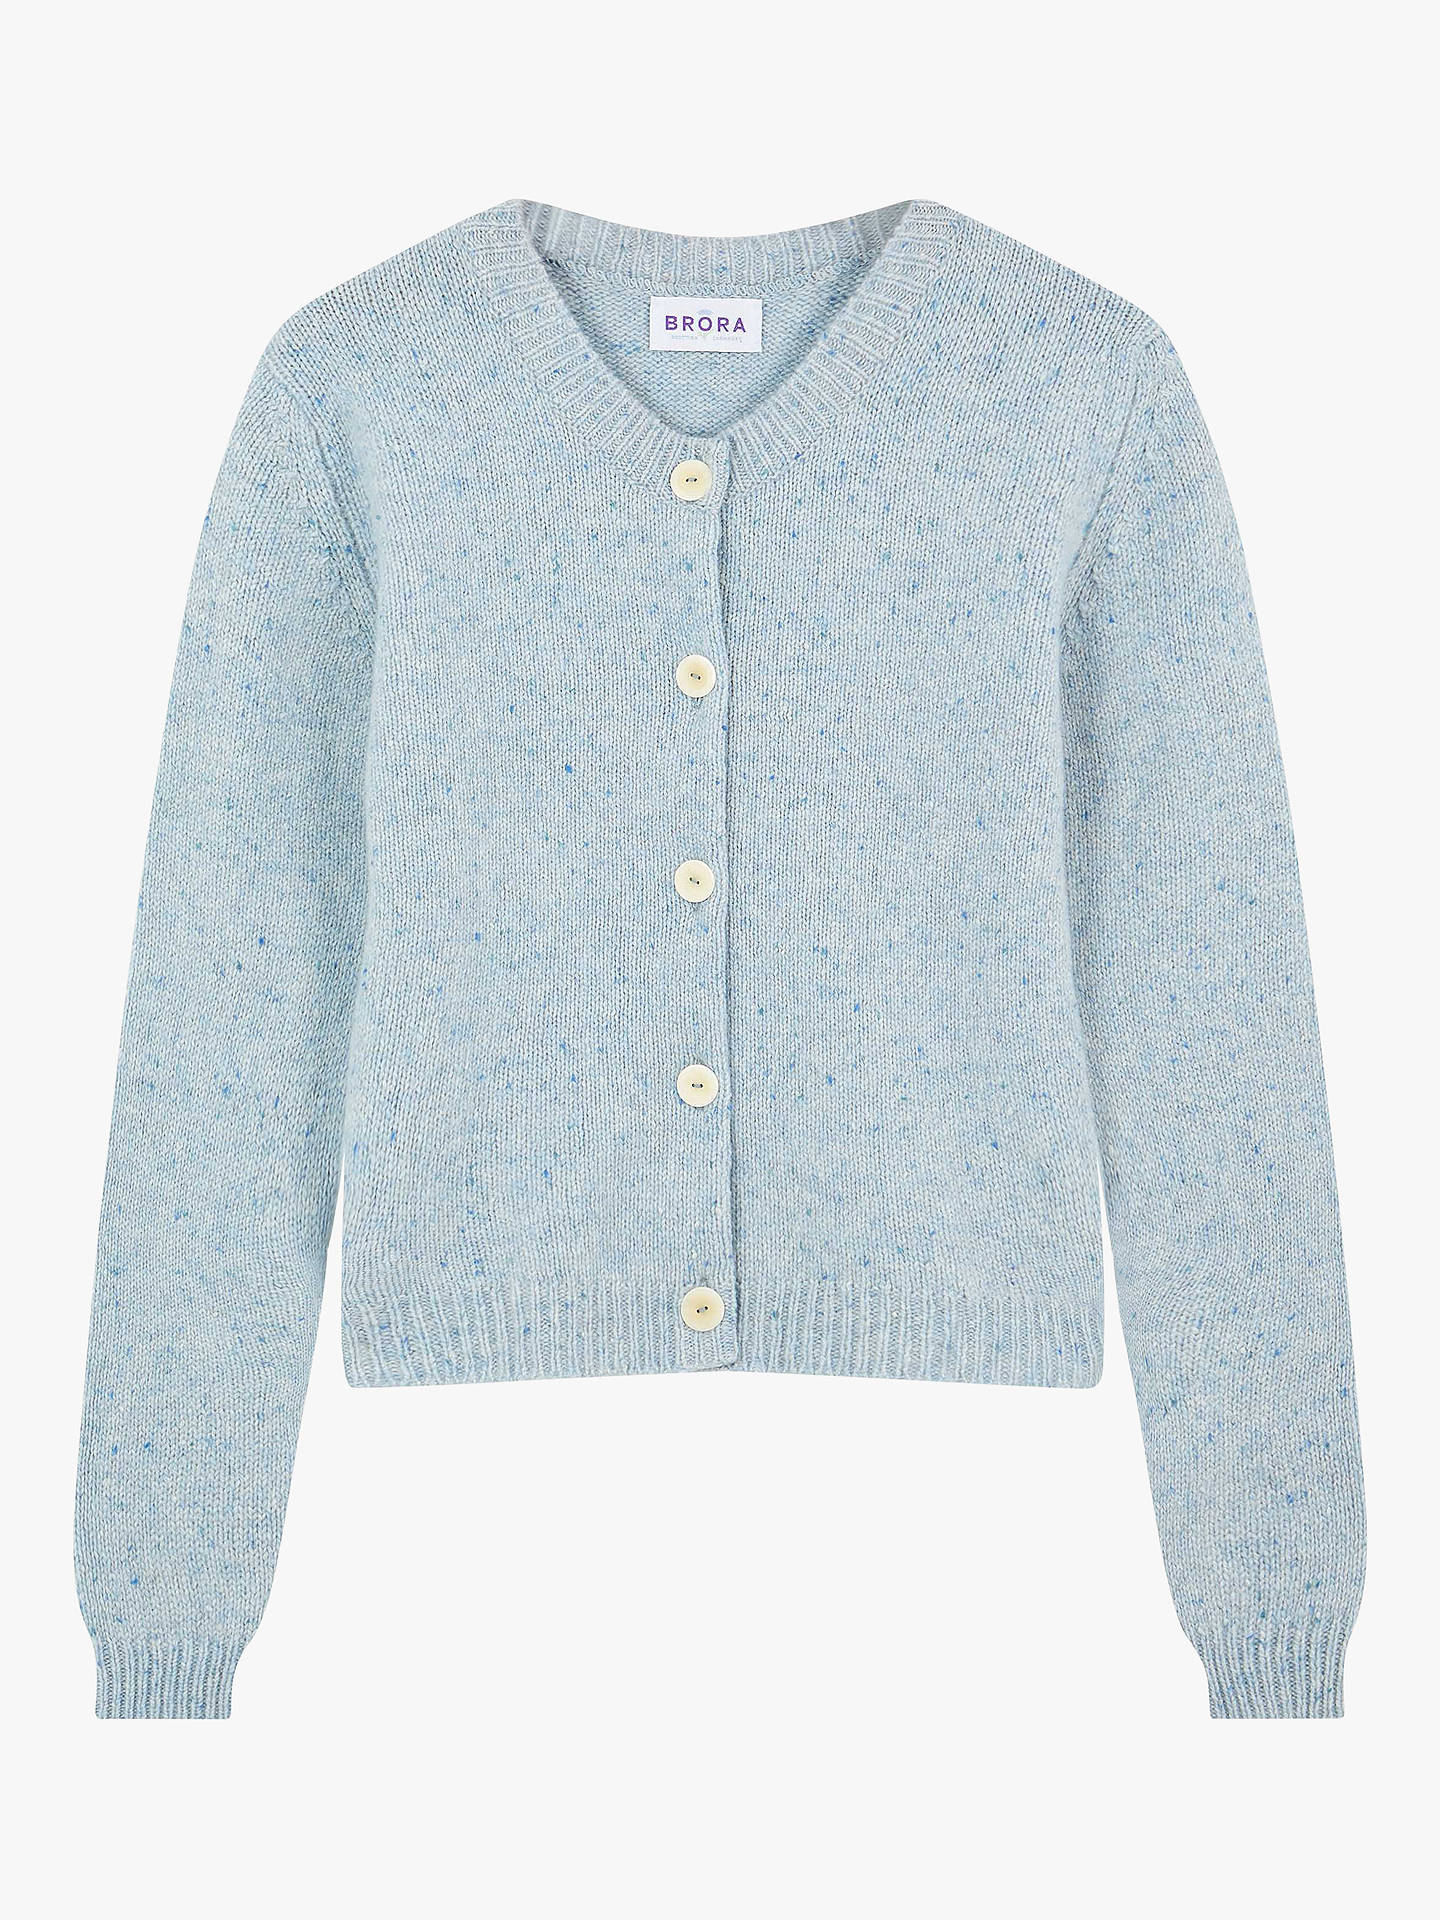 Brora Cashmere Donegal Cardigan, Mineral at John Lewis & Partners